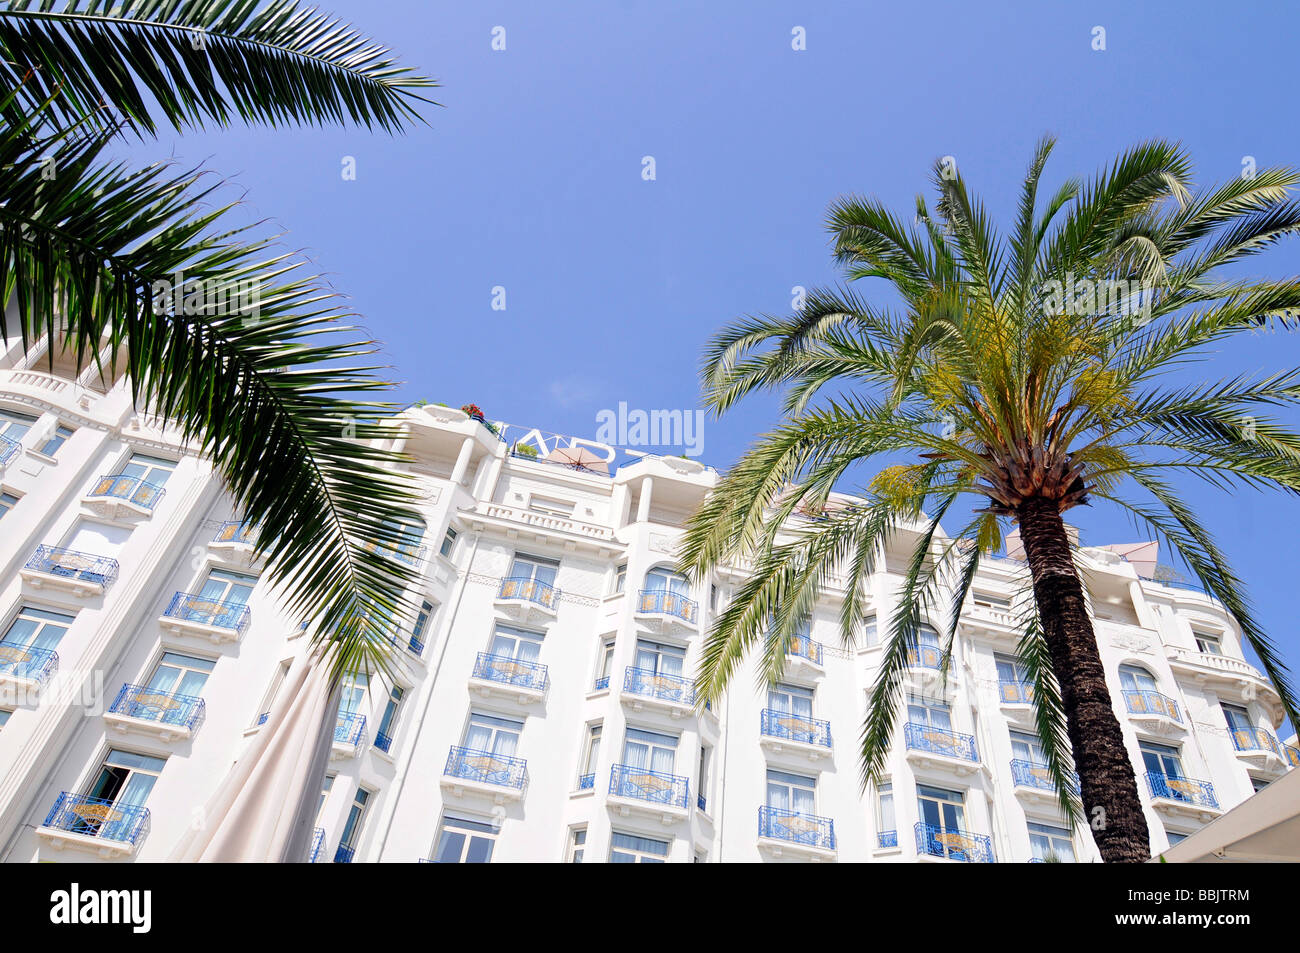 the Palace Hotel 'Martinez', one of the hotels appreciated by celebrities during the Cannes film festival, in Cannes, France. Stock Photo